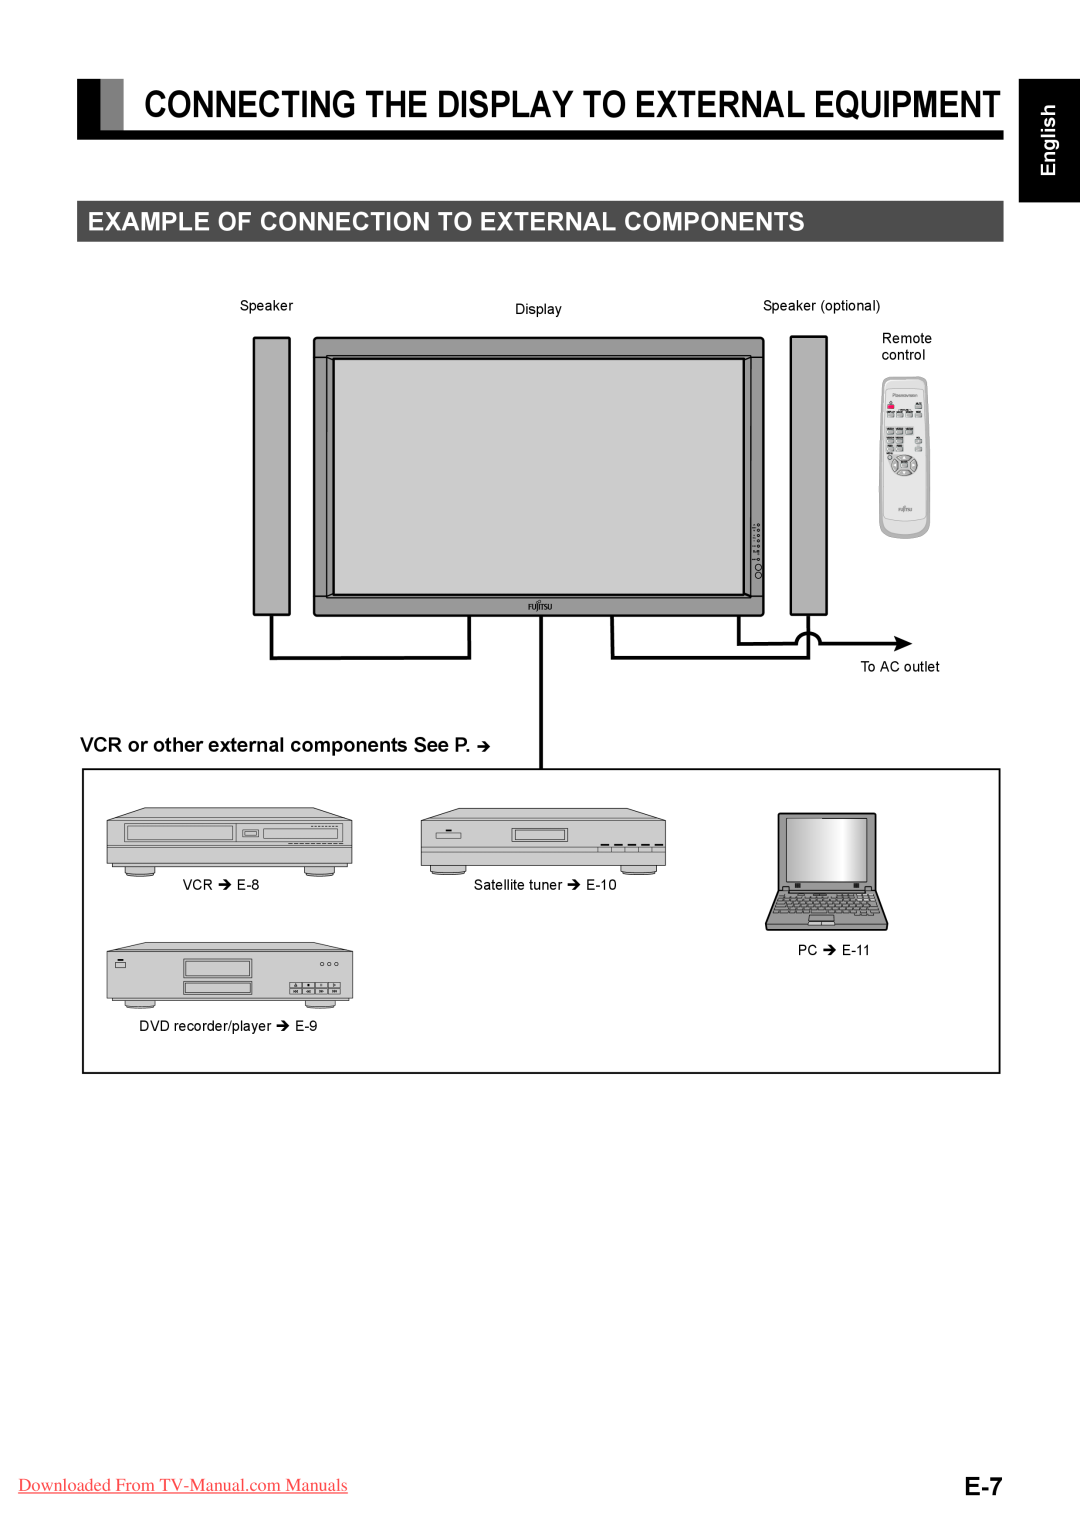 Fujitsu P63XHA40U Connecting The Display To External Equipment, Example Of Connection To External Components, 日 本 語 